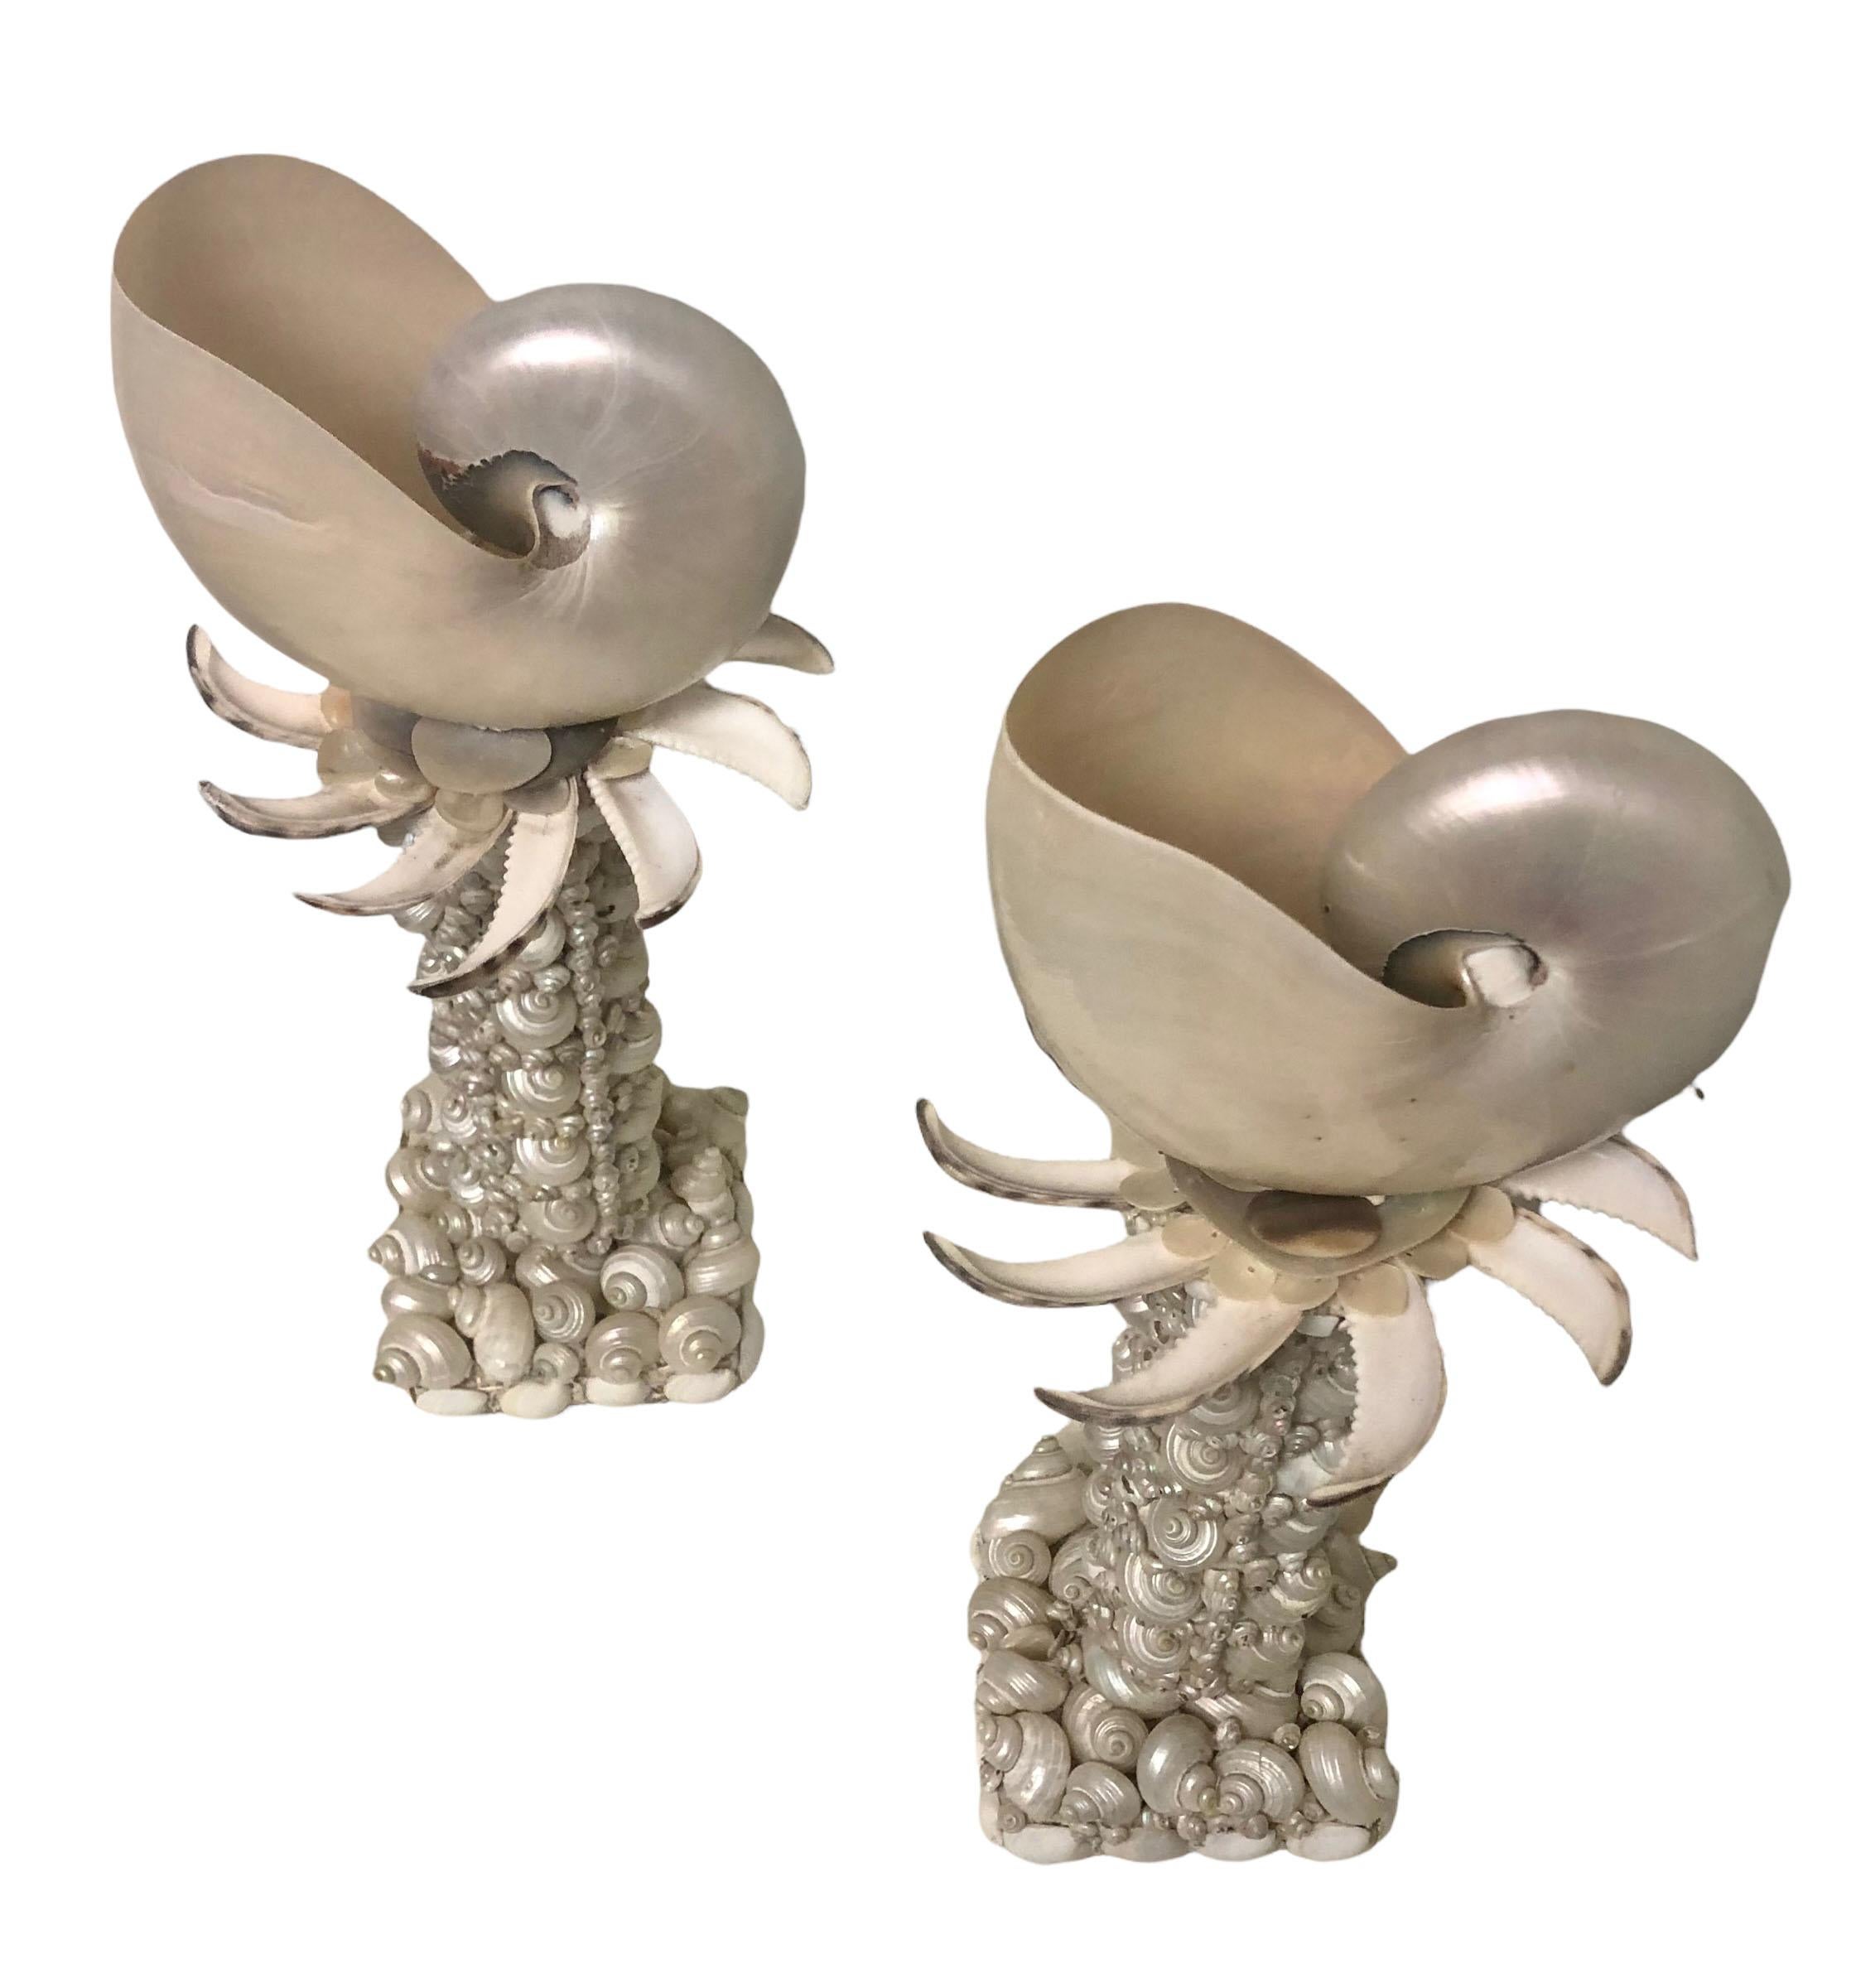 A pair of beautiful hand crafted Whimsy Nautilus topped seashell sculptures. Created by a local Tampa artist we carry exclusive in our shop. The base is 5